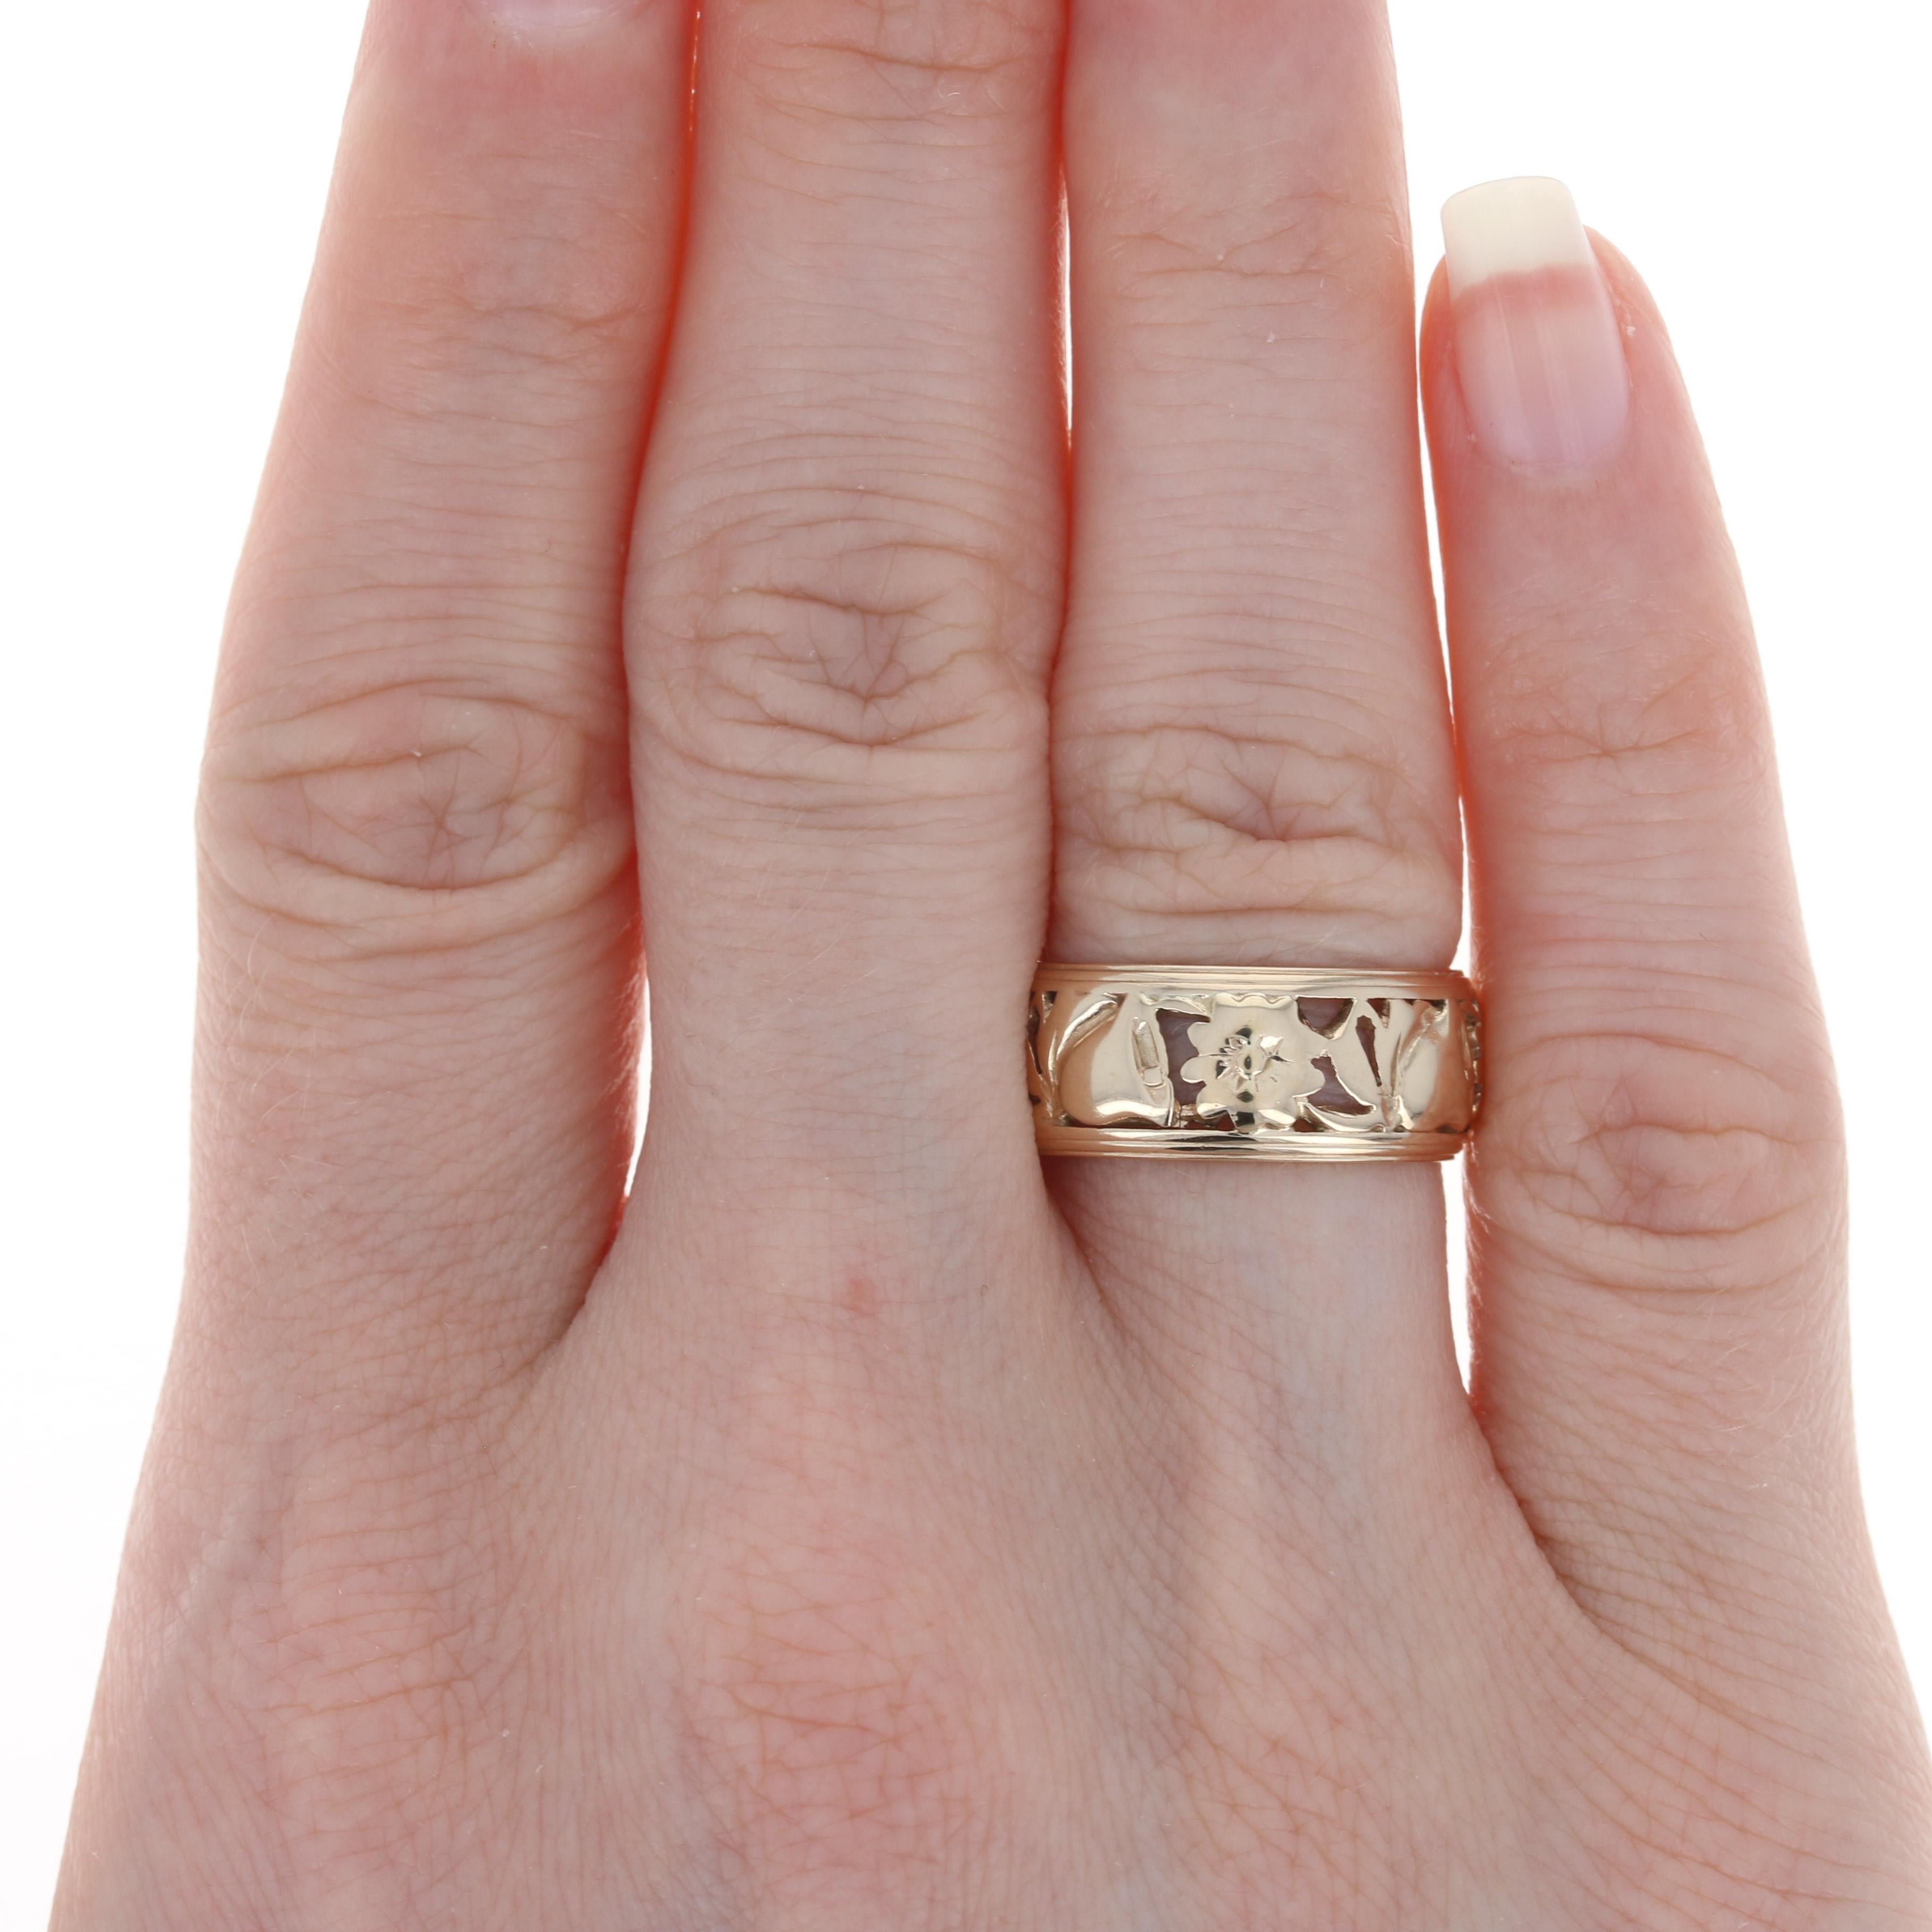 Size: 6 1/4
 
 Era: Vintage
 
 Metal Content: 14k Yellow Gold
 
 Style: Band
 Theme: Flowers & Bells
 Features: Open Cut Design
 
 Face Height (north to south): 11/32